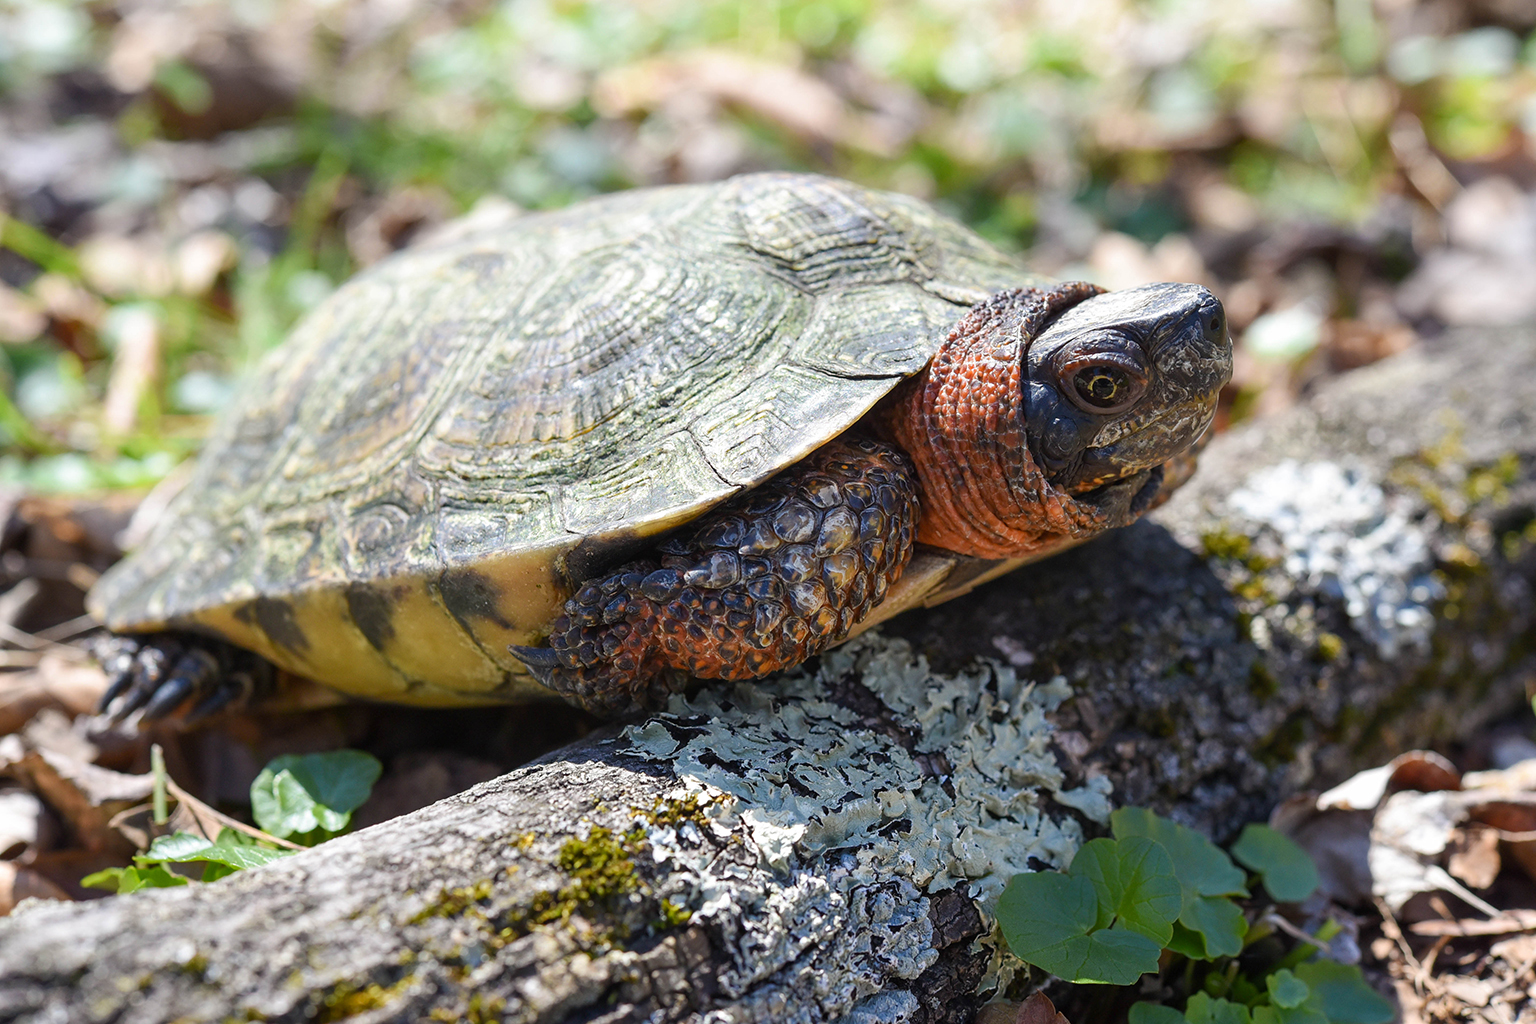 How fast are wood turtles?